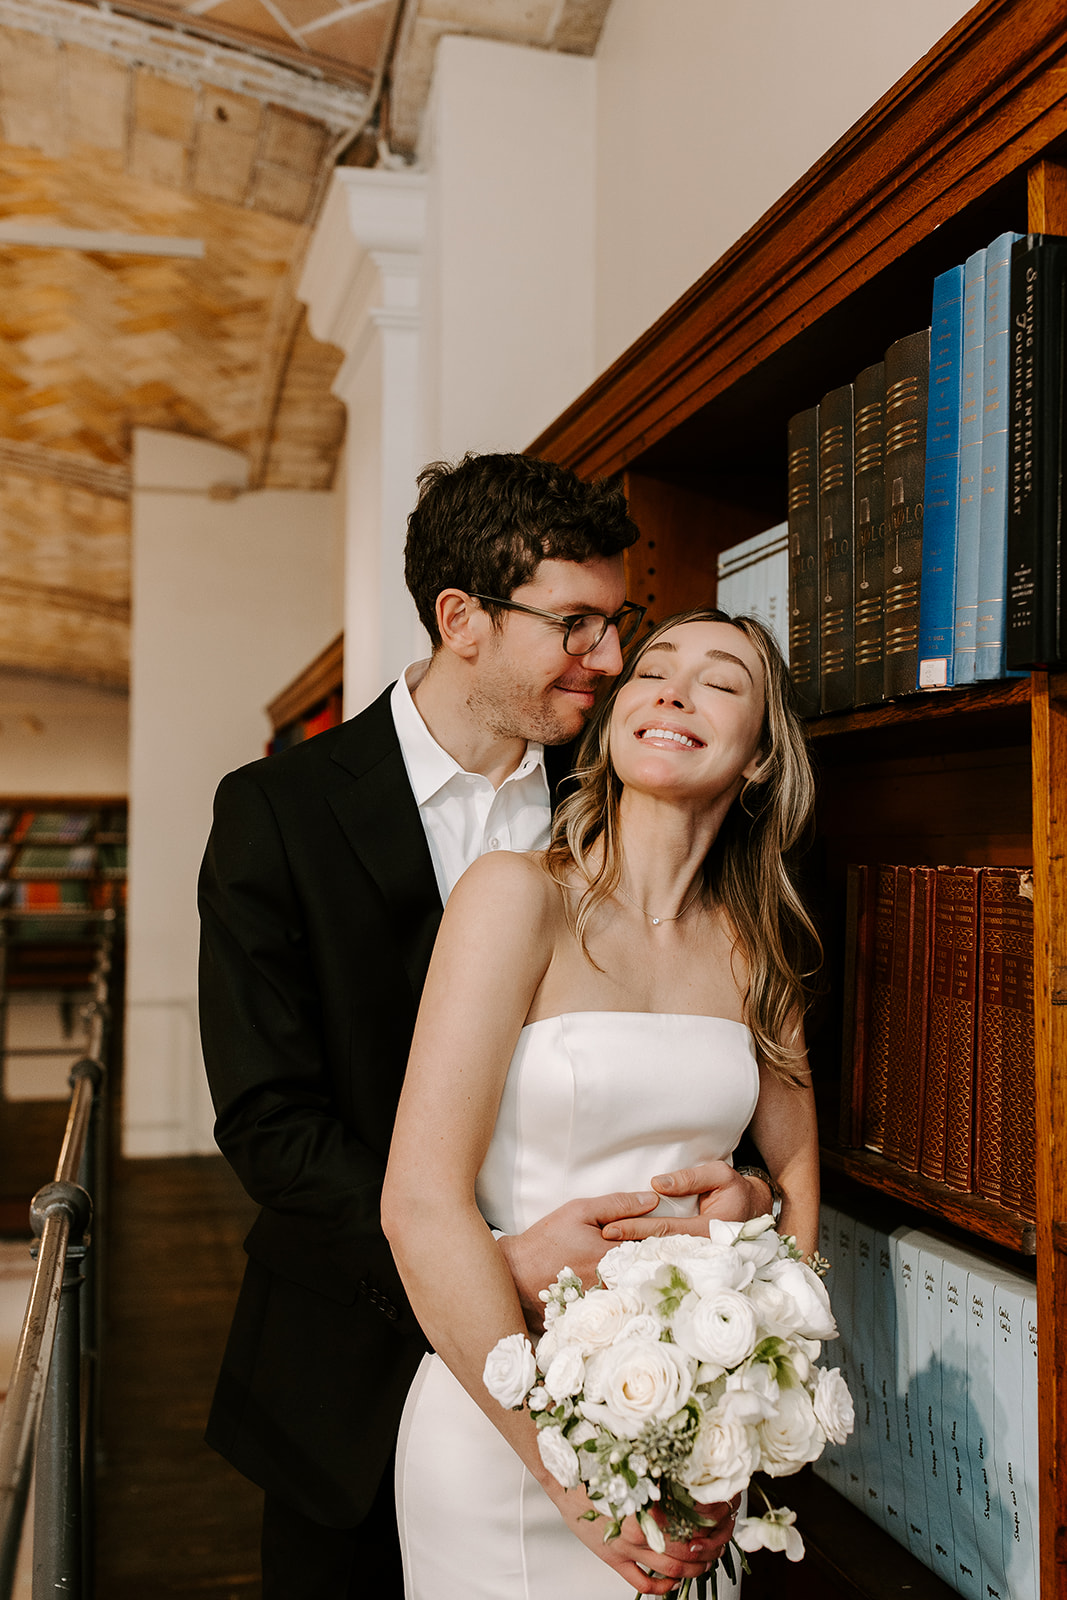 Beautiful bride and groom pose together after their stunning Boston public library elopement